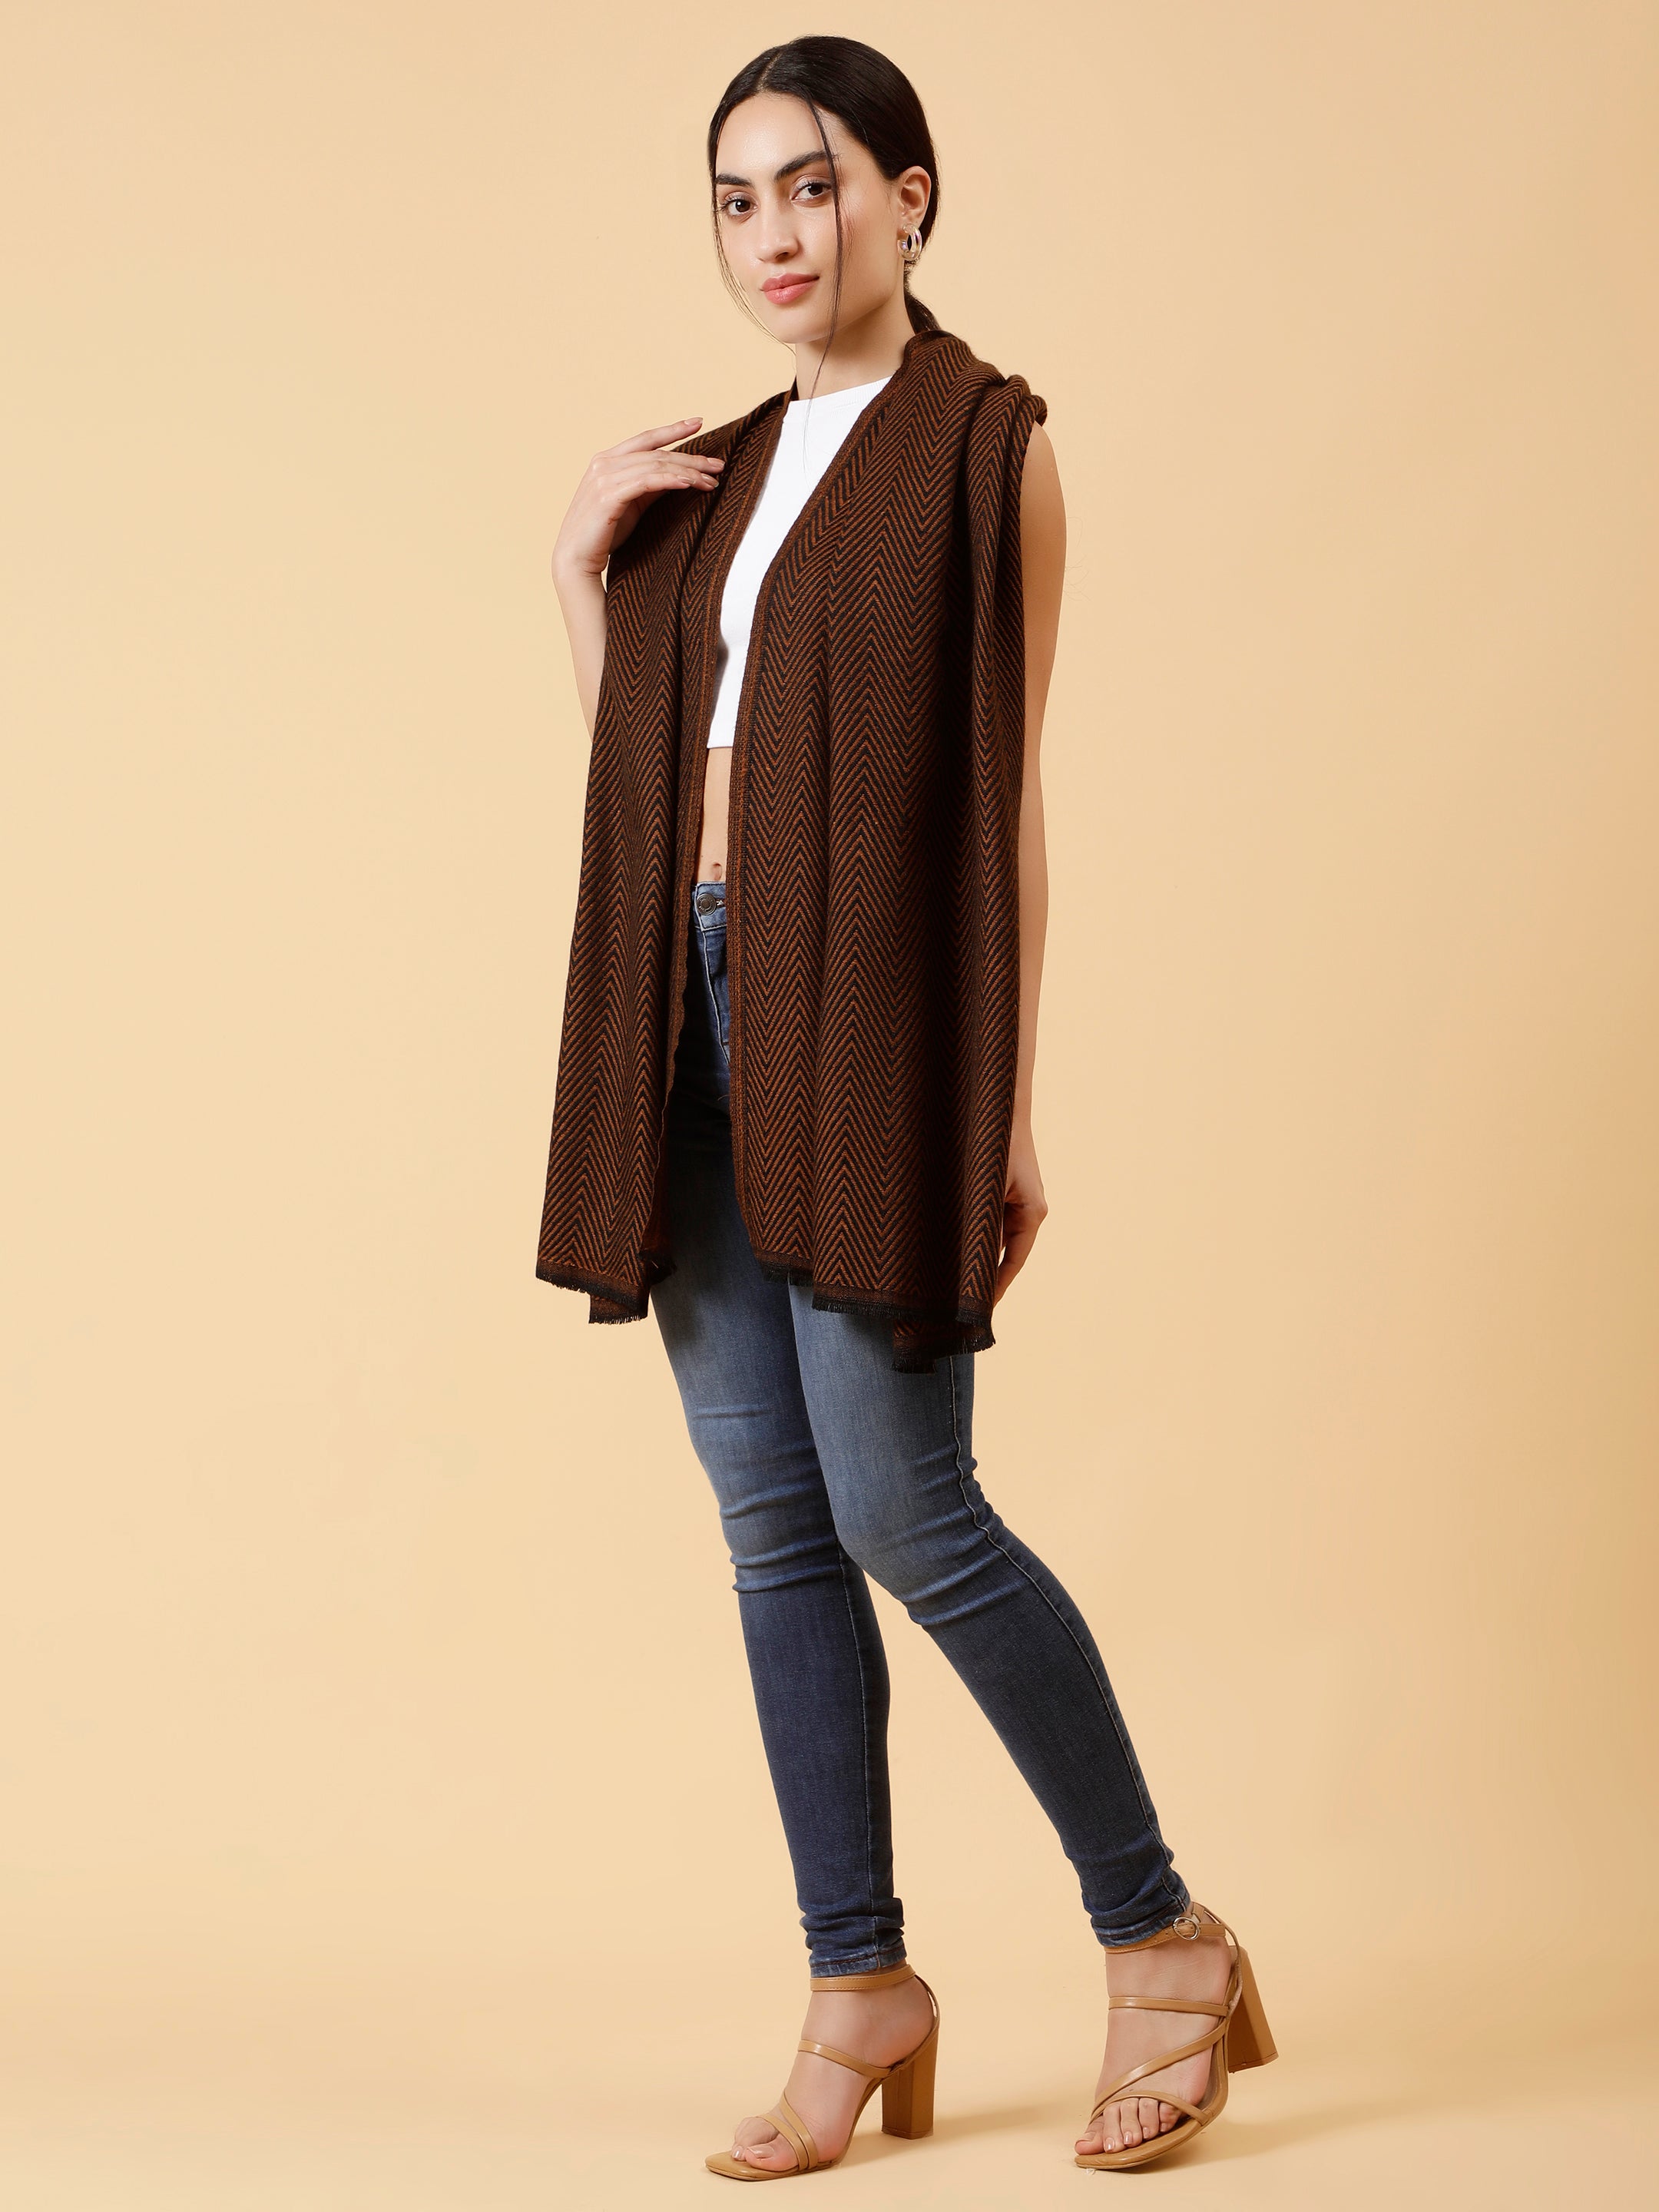 brown-and-black-woven-woolen-stole-mcmmst4236-3